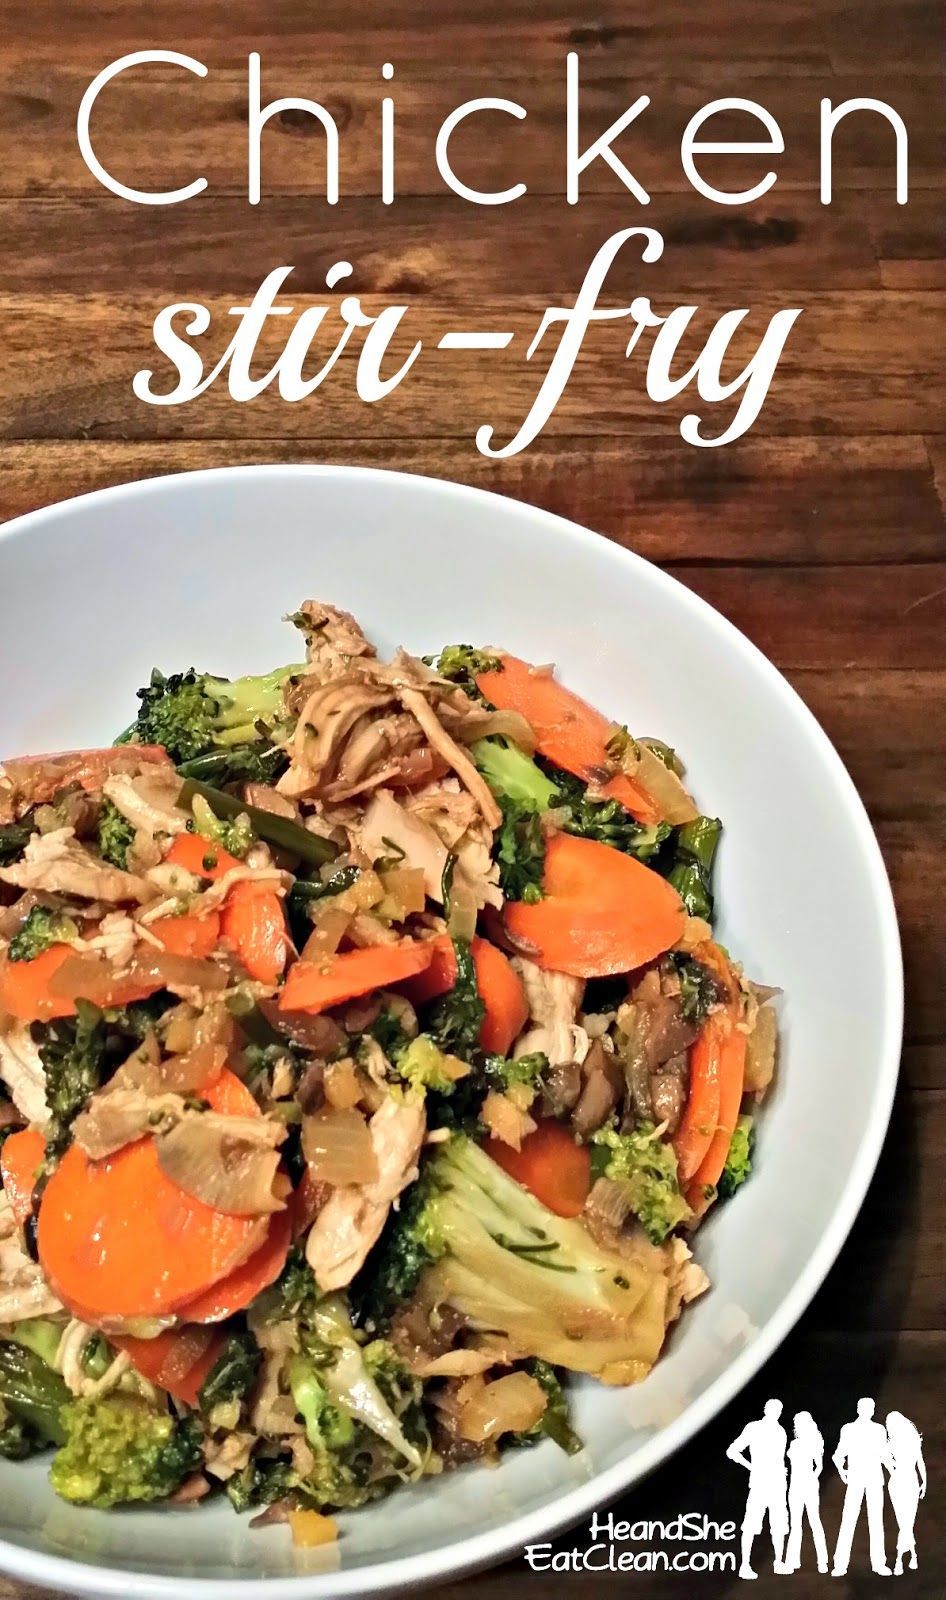 This is a very good stir fry! I made it twice in 2 two weeks since it consumes of everything I always have in house. The ginger in it so damn tasty! And it is Lily